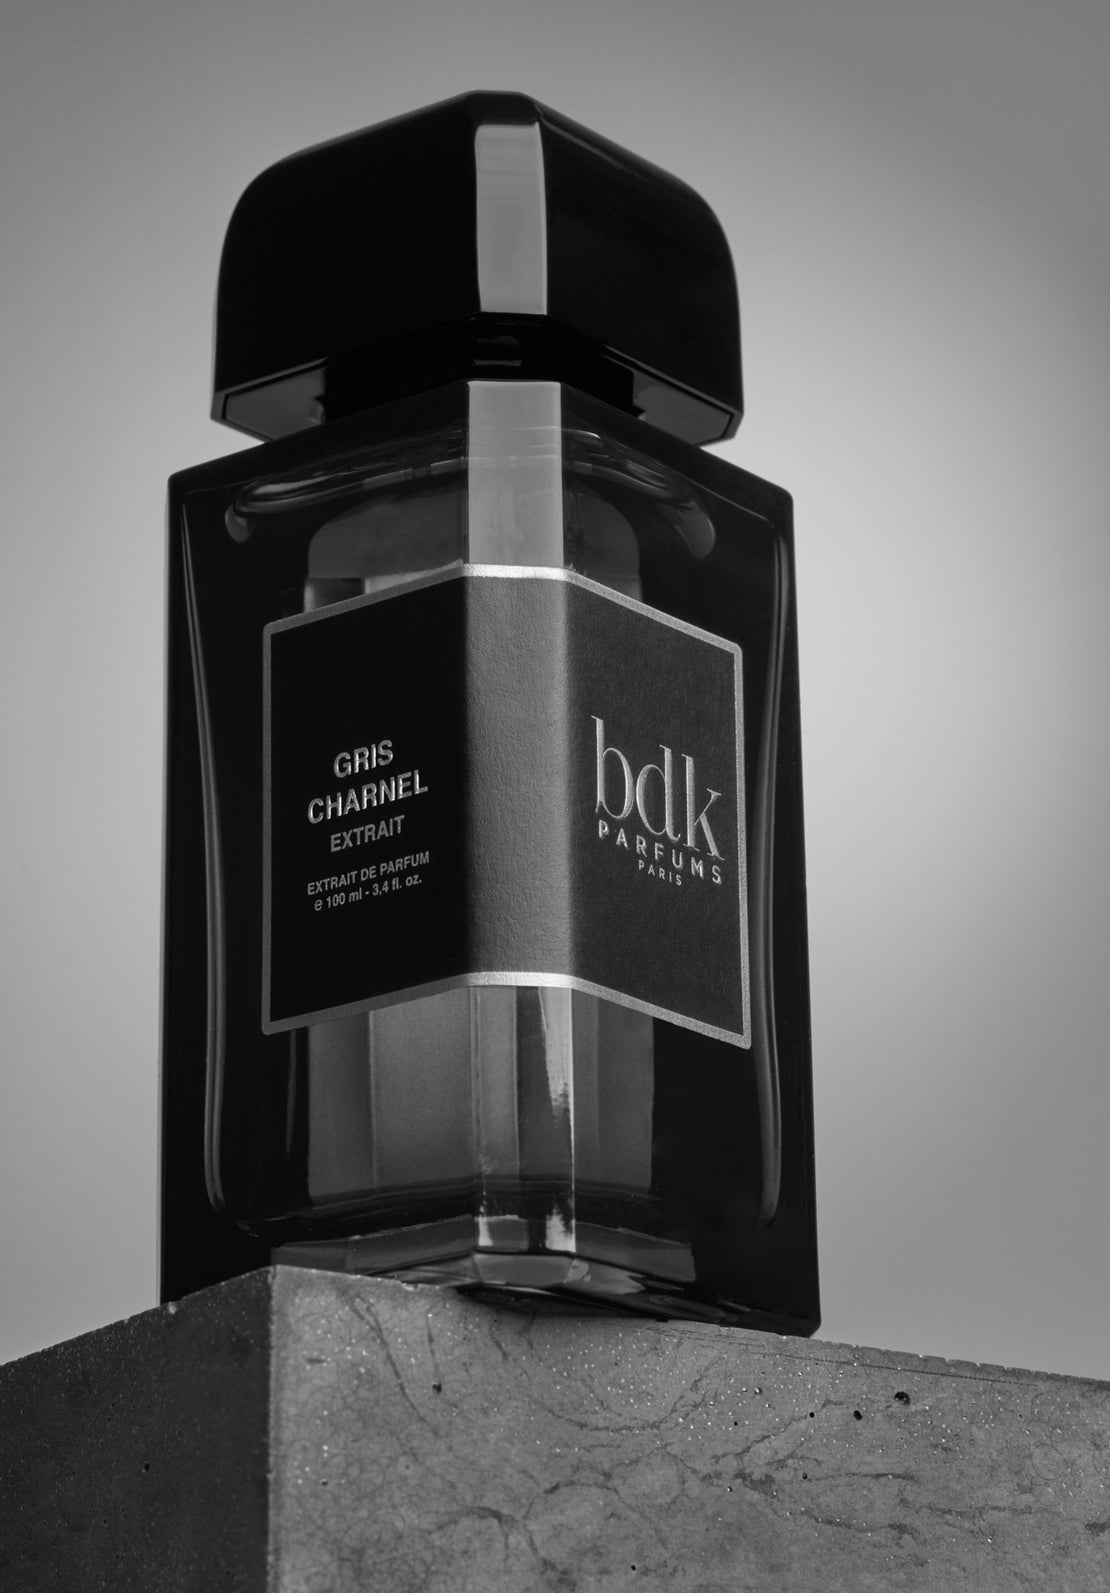 BDK Gris Charnel Extrait- A Sensual And Mysterious Scent